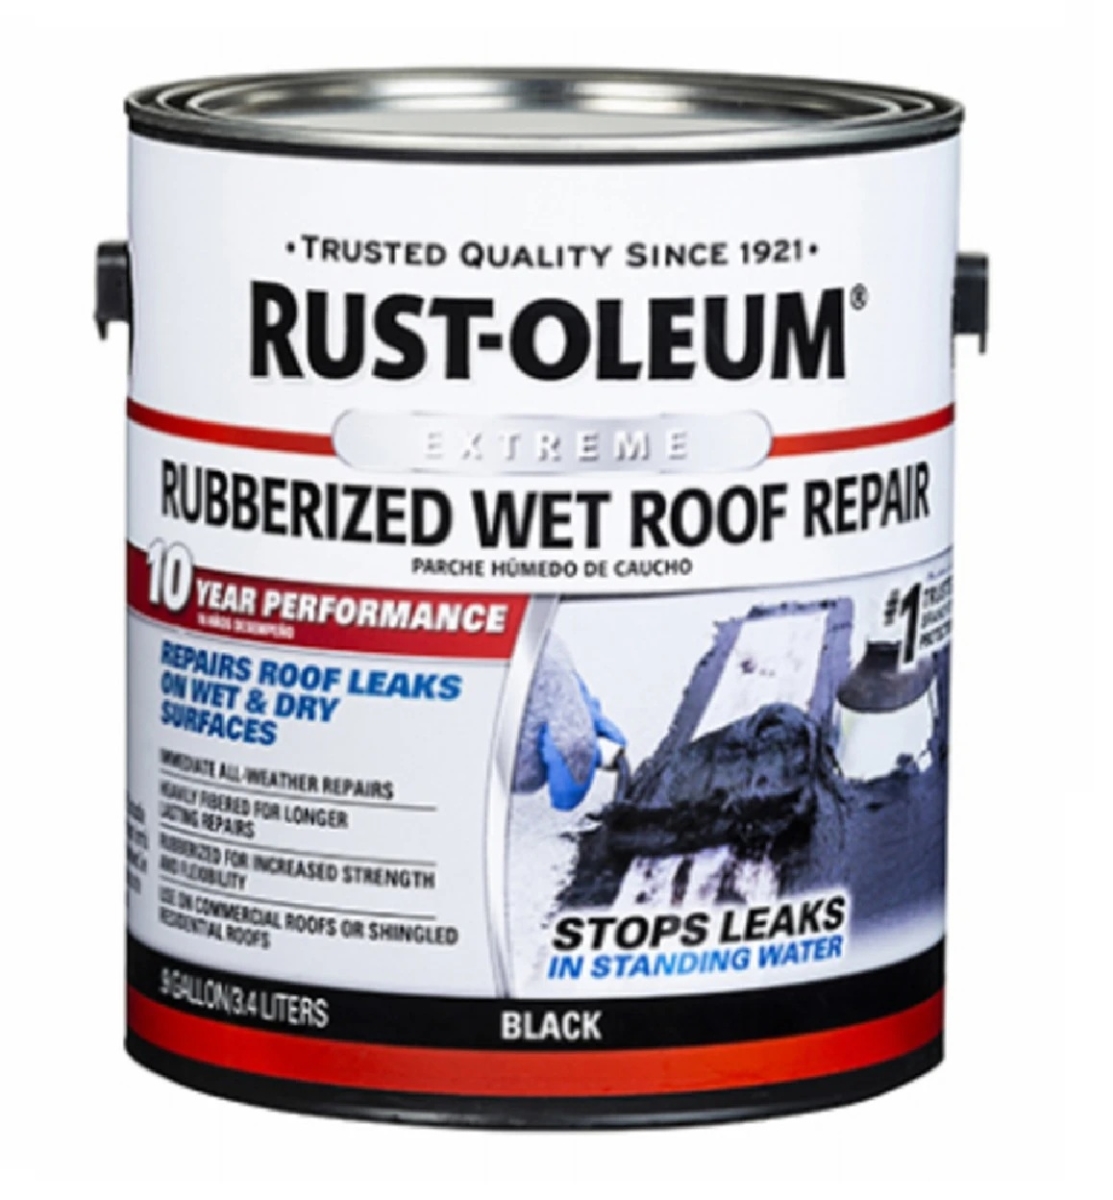 Picture of Rust-Oleum 267896 1 gal Wet Roof Leak Stop Cement Patch